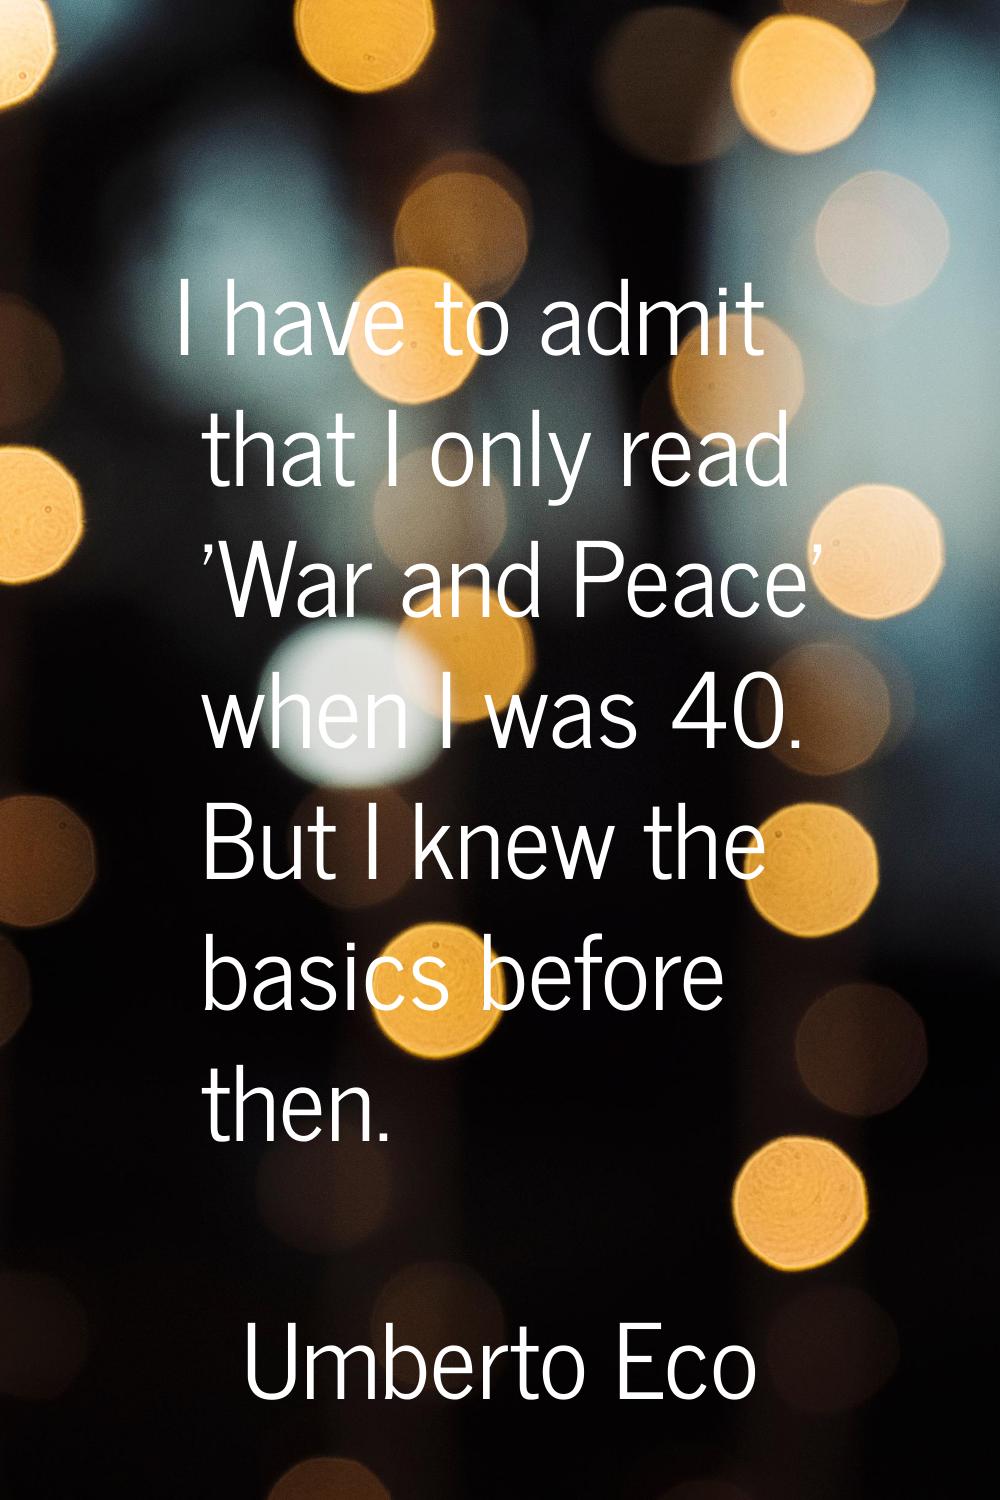 I have to admit that I only read 'War and Peace' when I was 40. But I knew the basics before then.